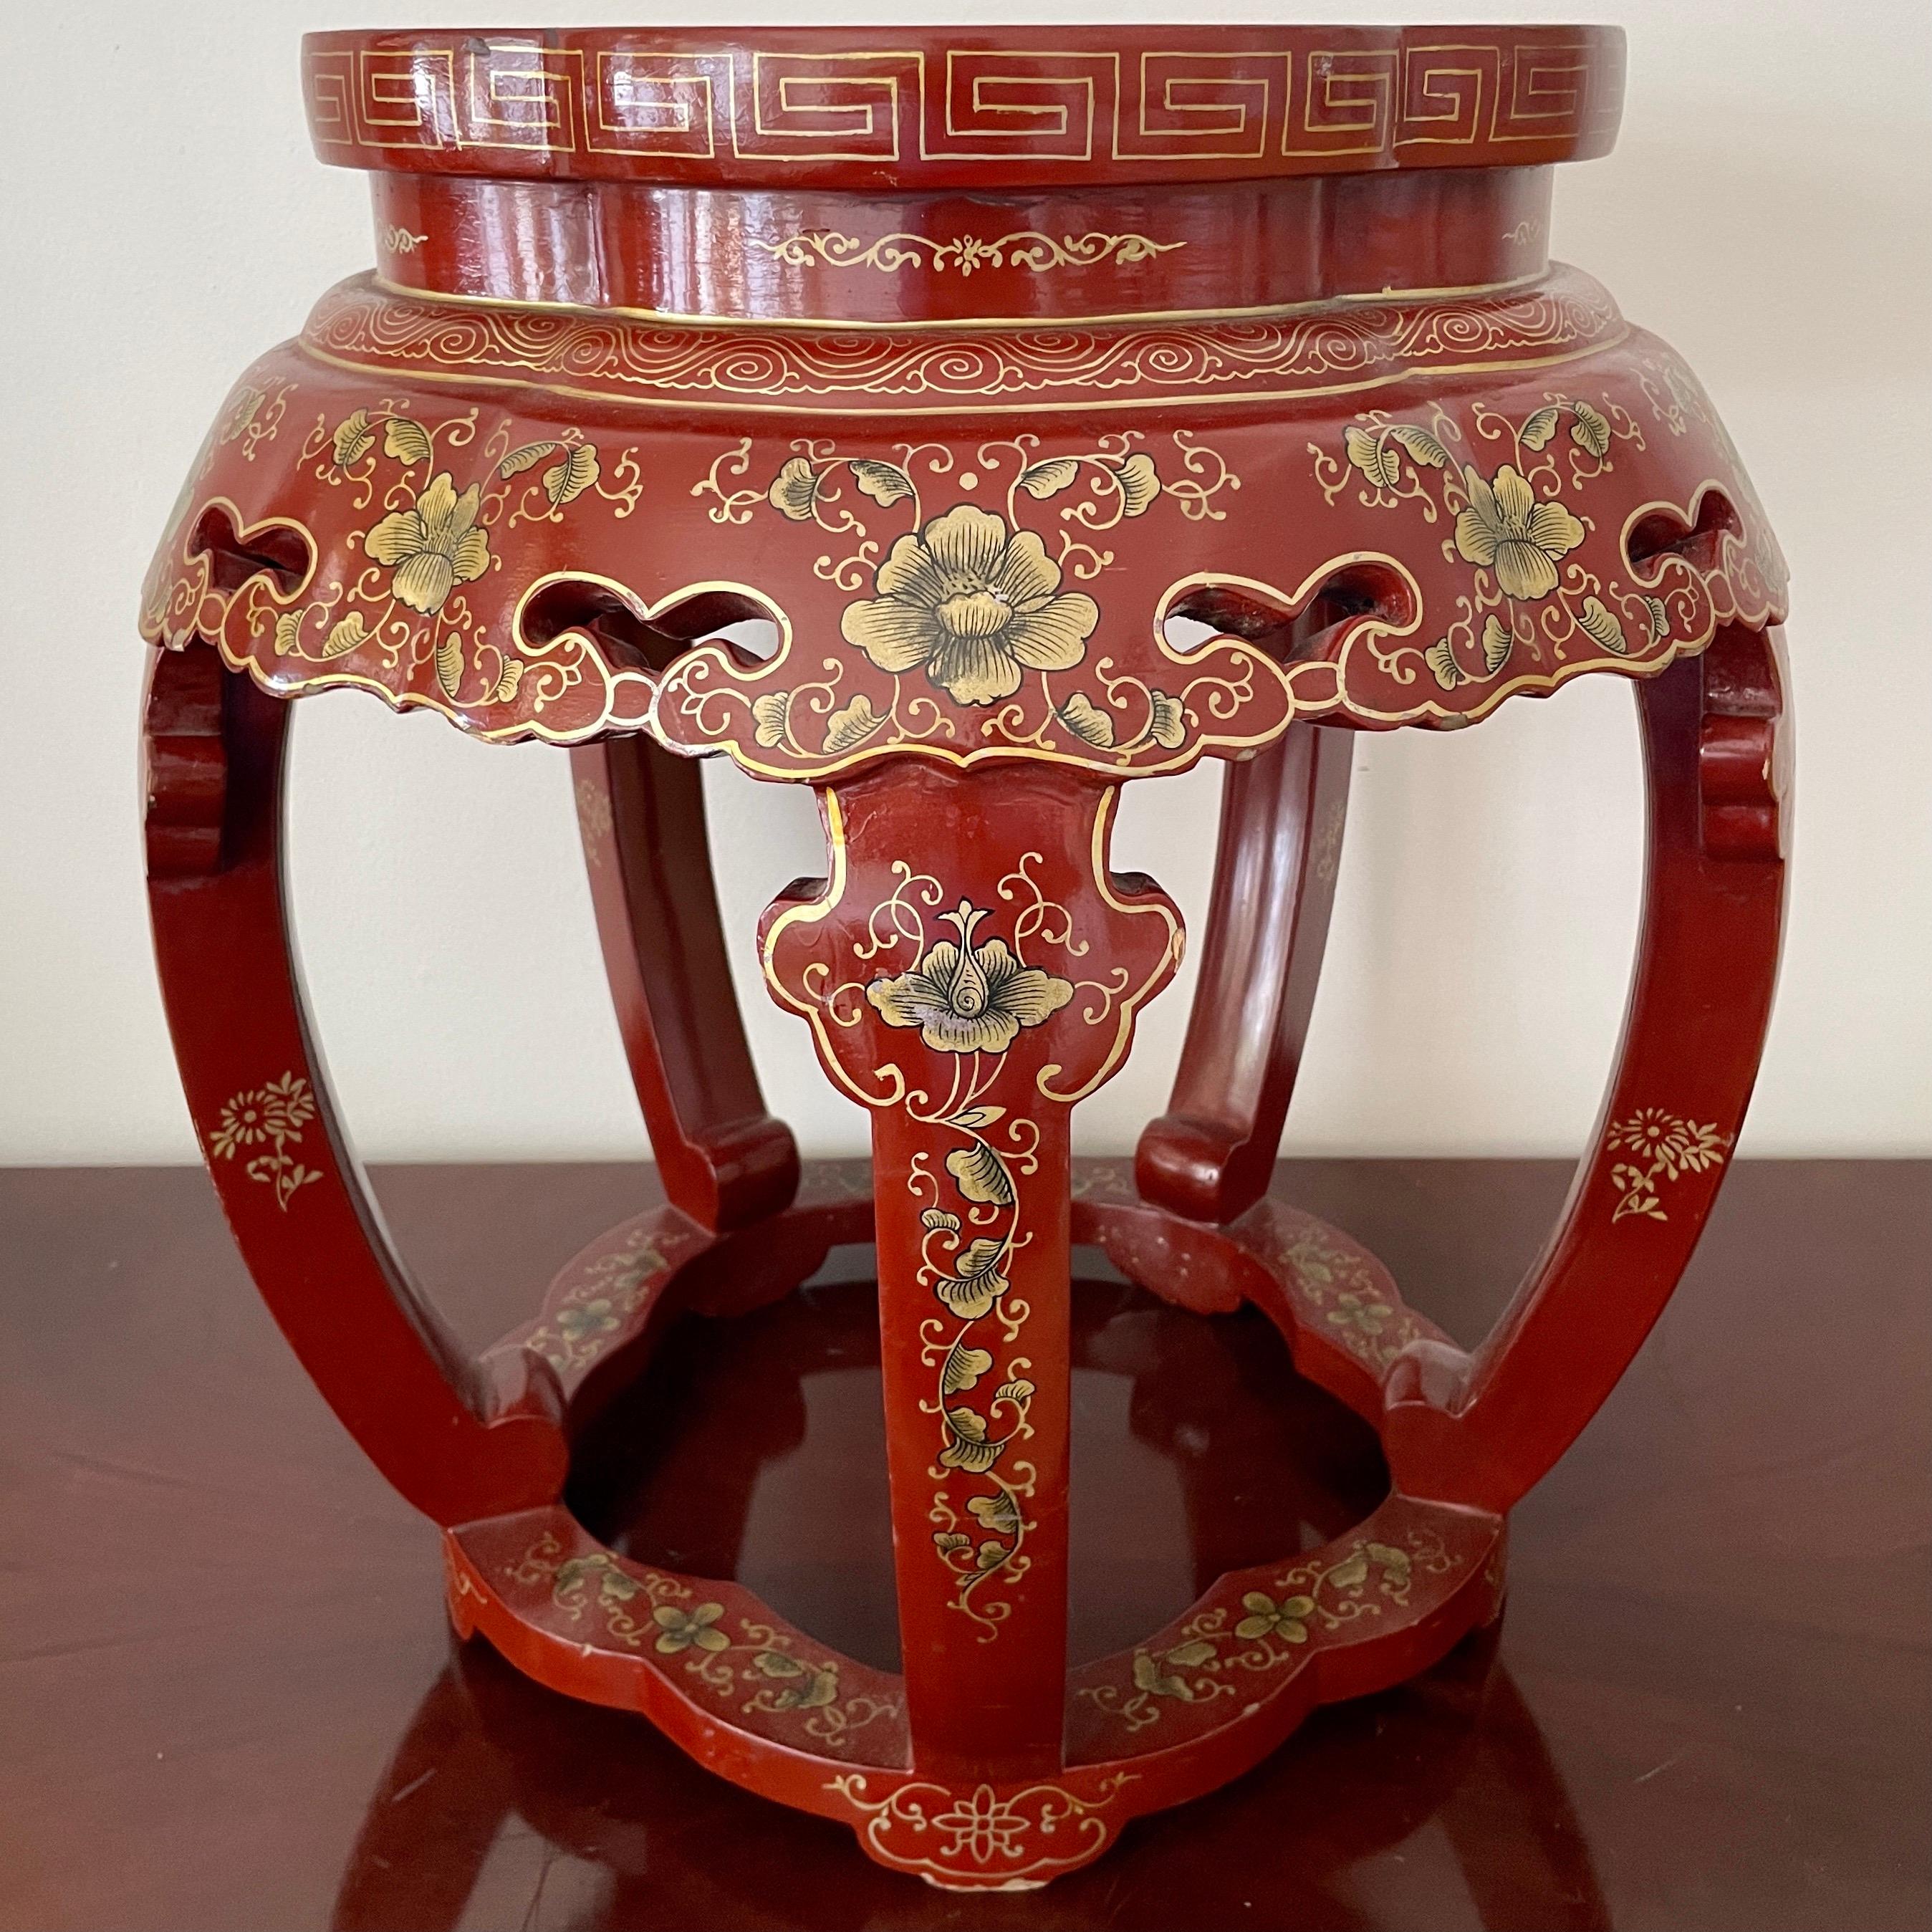 Beautiful chinoiserie cocktail stool wood table on five legs and a lower base. Gorgeous carved with gold details in every part of this table to enchant your interiors and bar.